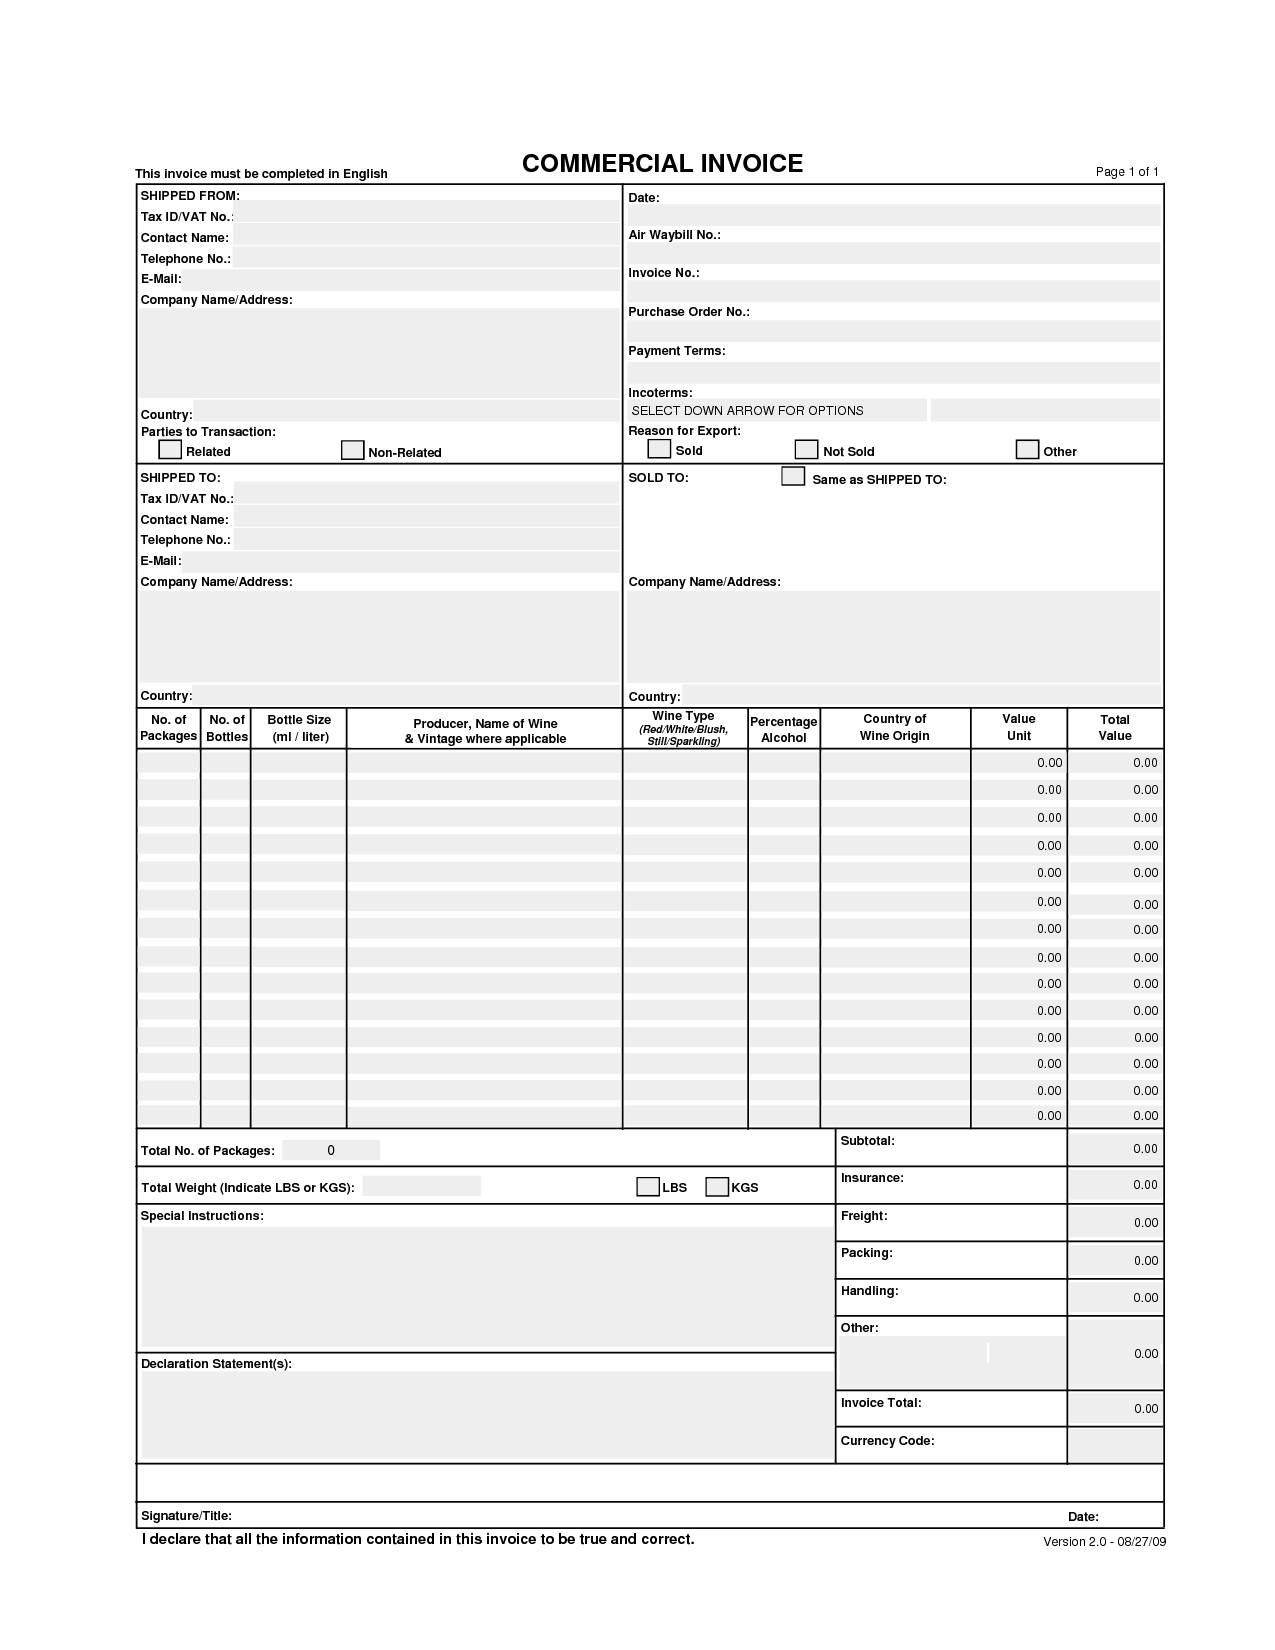 commercial invoice template ups ups invoice invoic free printable fillable commercial invoice